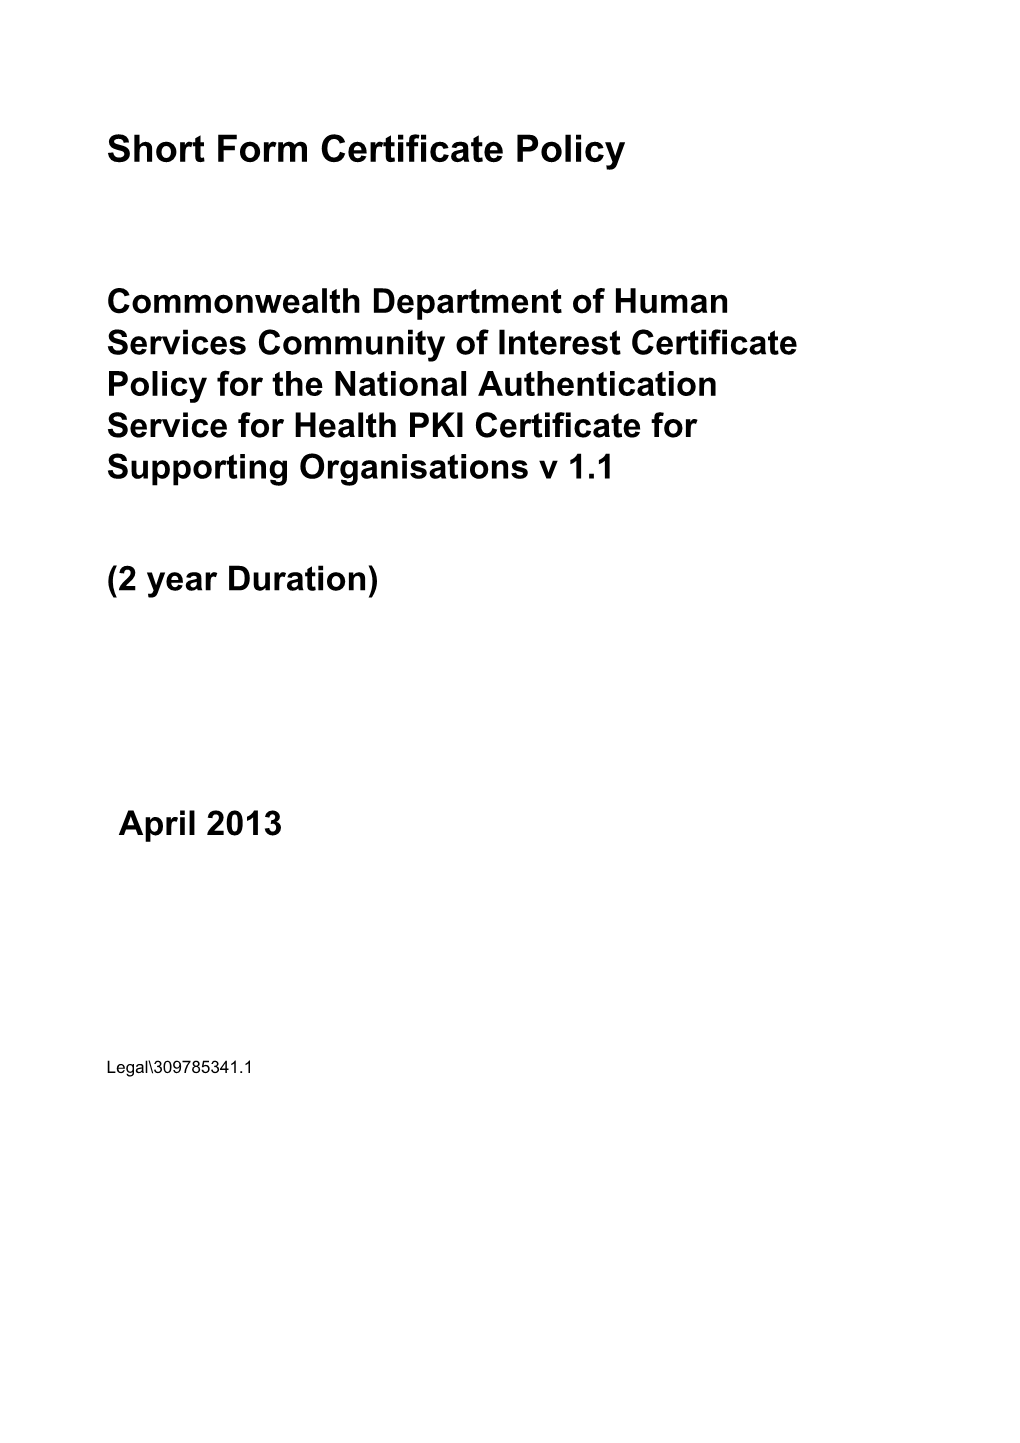 Commonwealth Department of Human Services Community of Interest Certificate Policy For